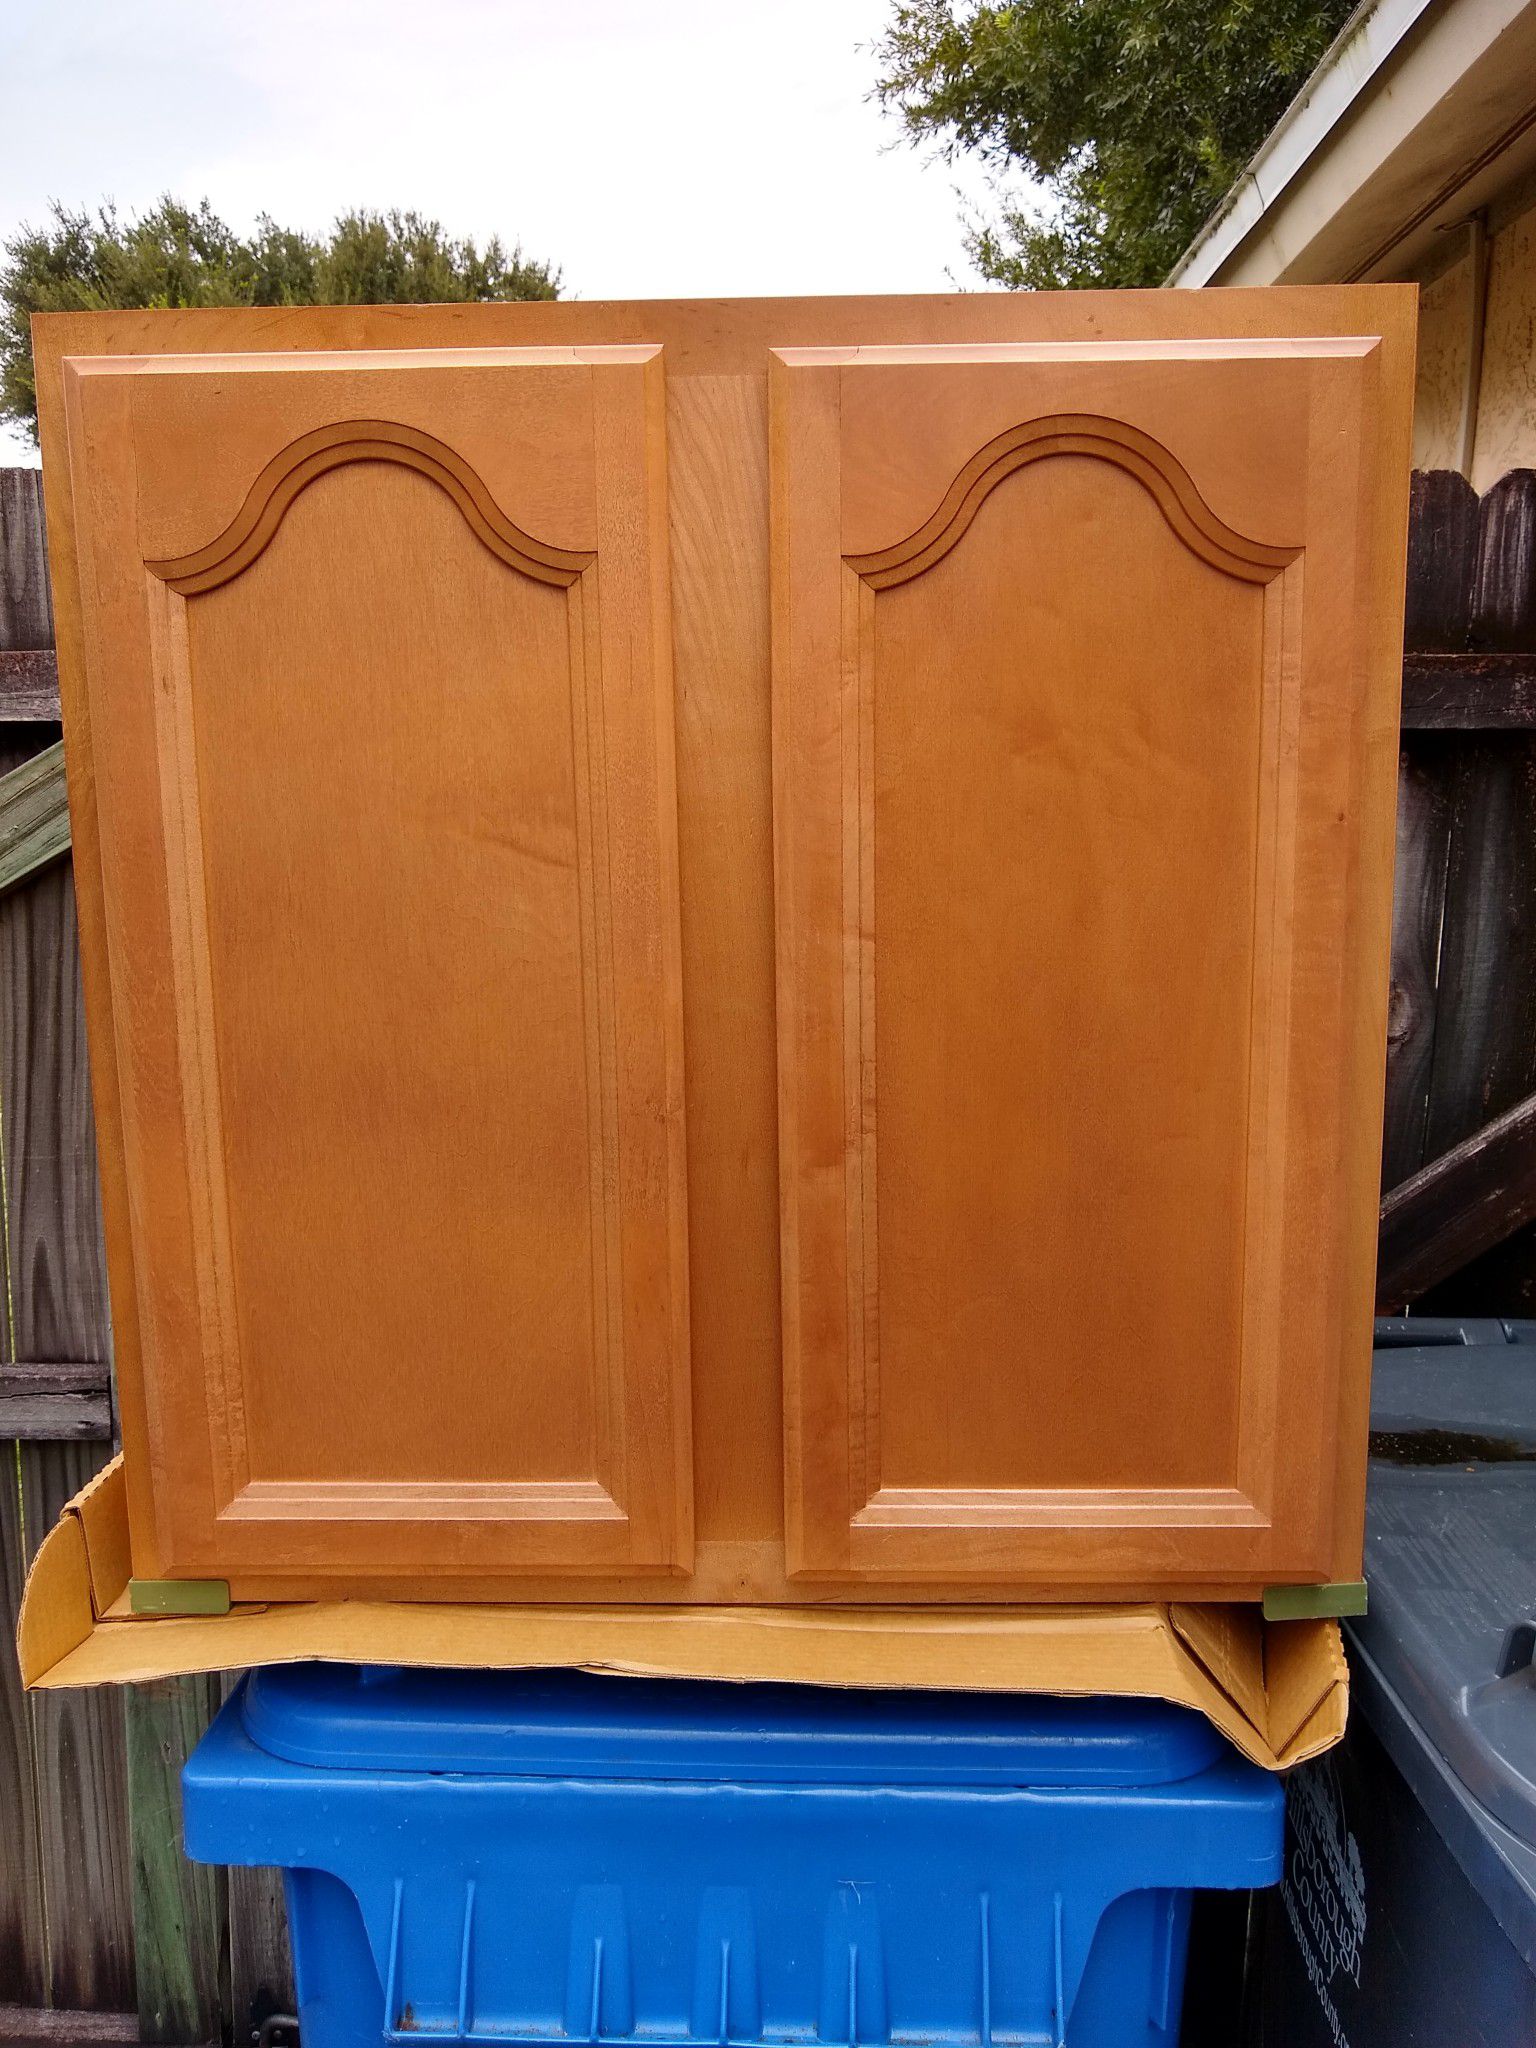 Kitchen cabinets, Shenandoah Cathedral in a maple spice finish New in the boxes.